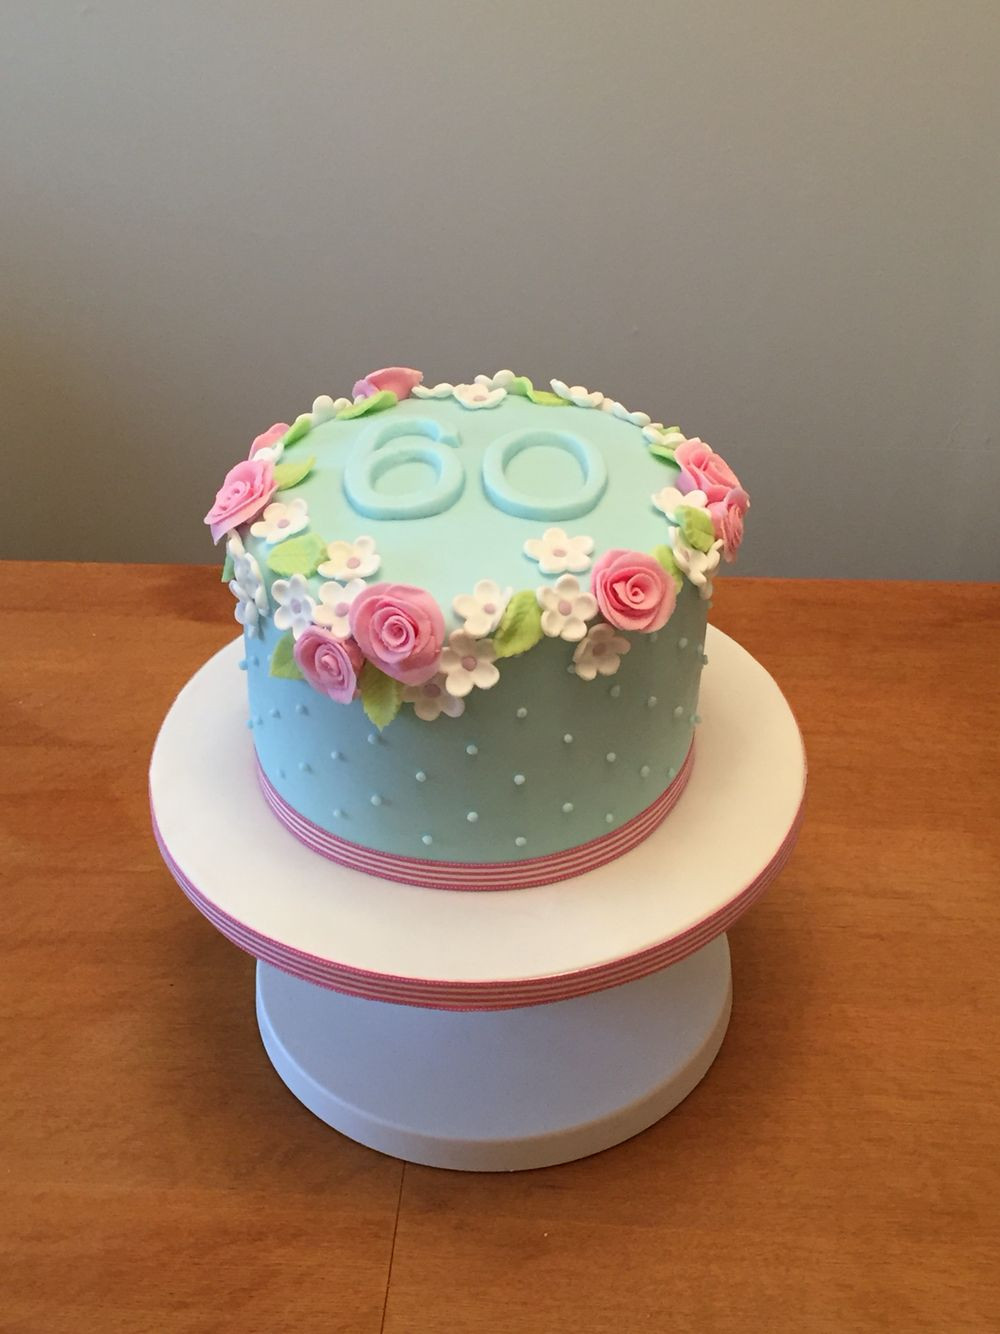 60th Birthday Cakes For Her
 60th birthday cake flowery and simple …